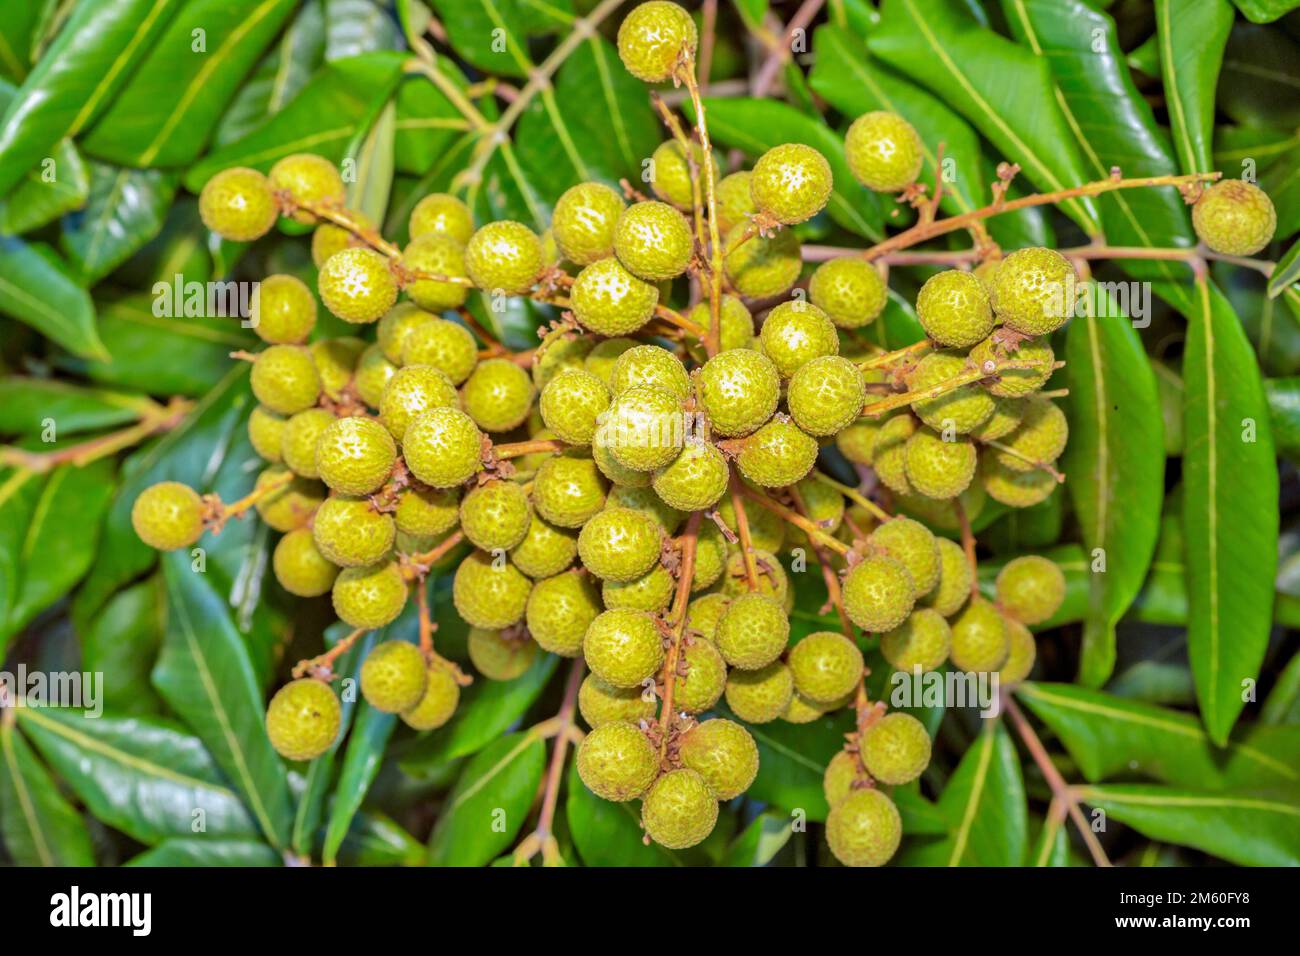 Longan (Dimocarpus longan) is a small, round, sweet, and watery fruit that is verry similar to lychee fruit. It has a yellowish-brown thick shell Stock Photo